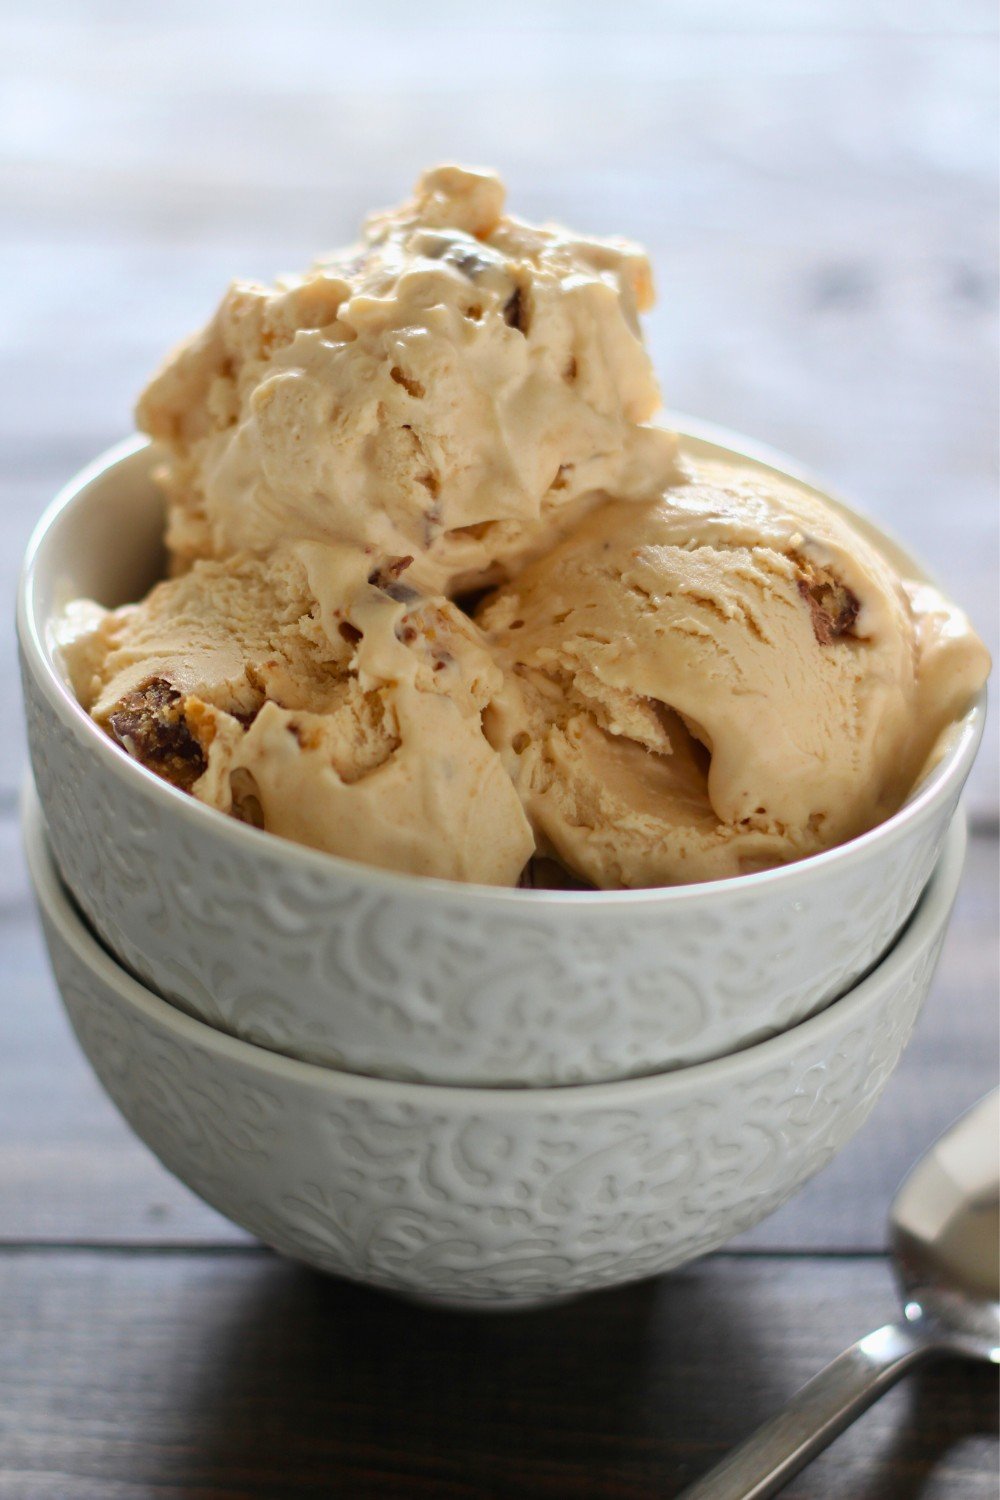 a whole bowl full of three large scoops of no-churn ice cream.